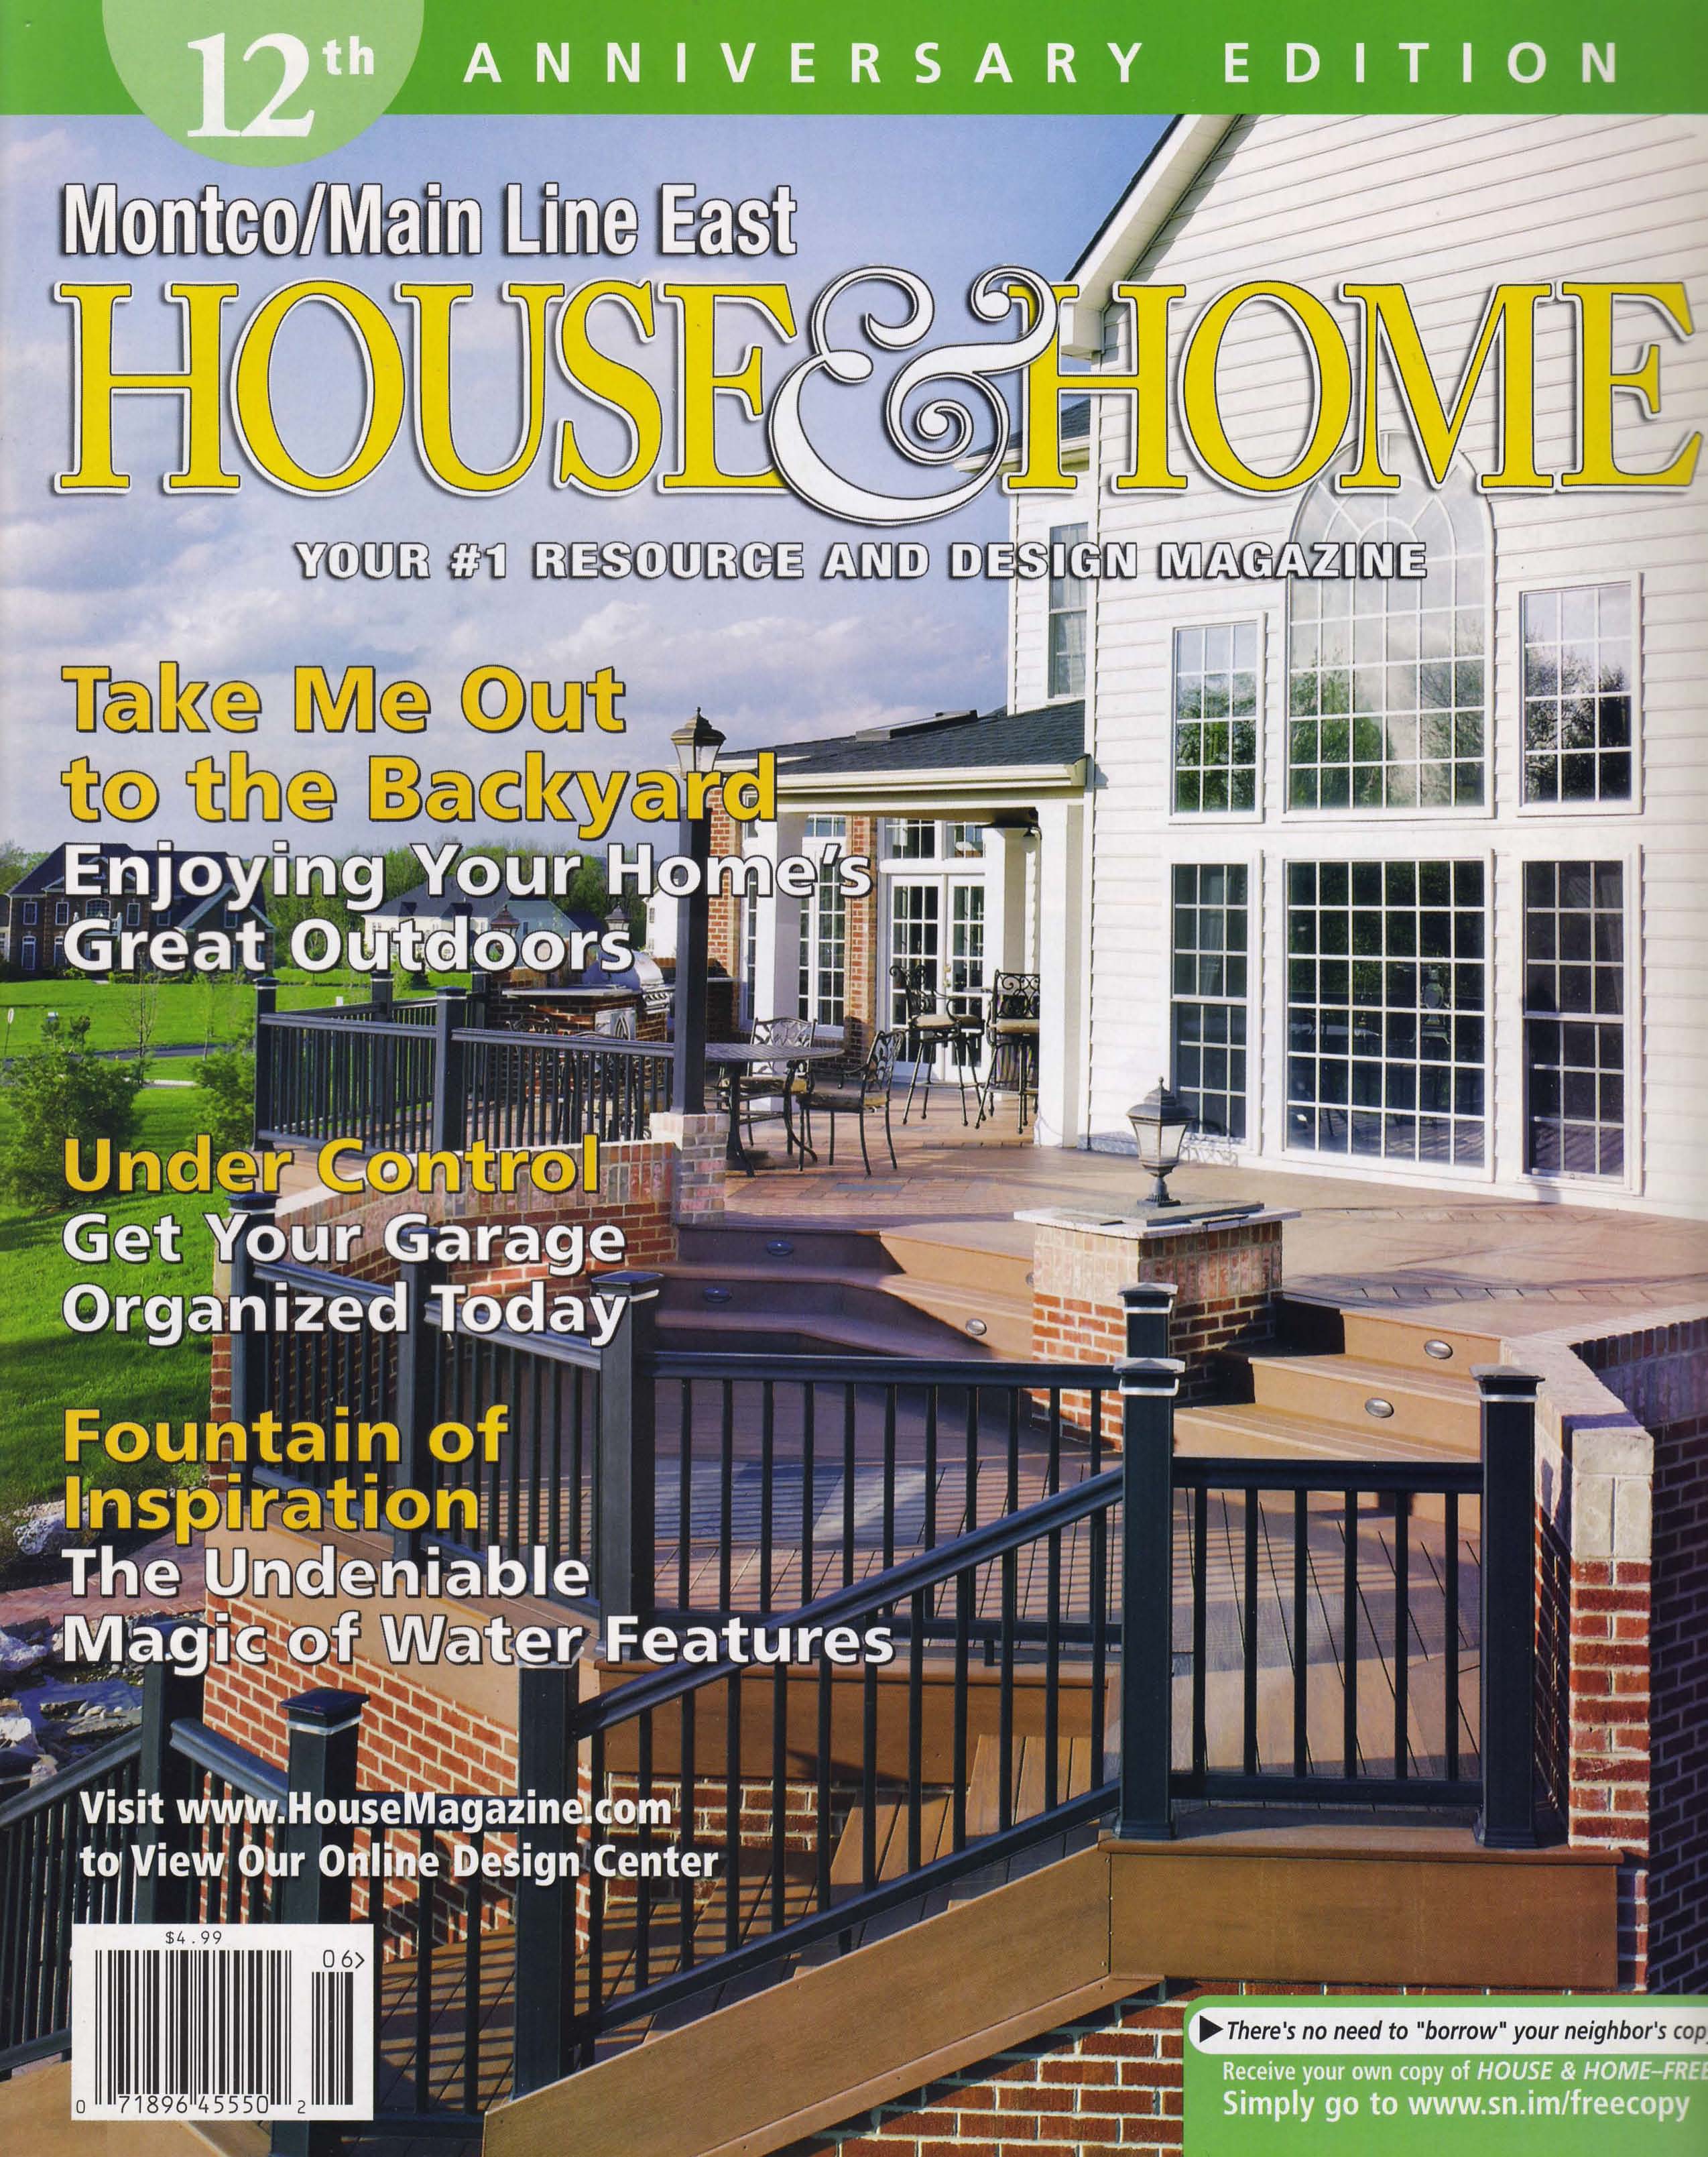 House & Home Decorating Advice 2011 cover